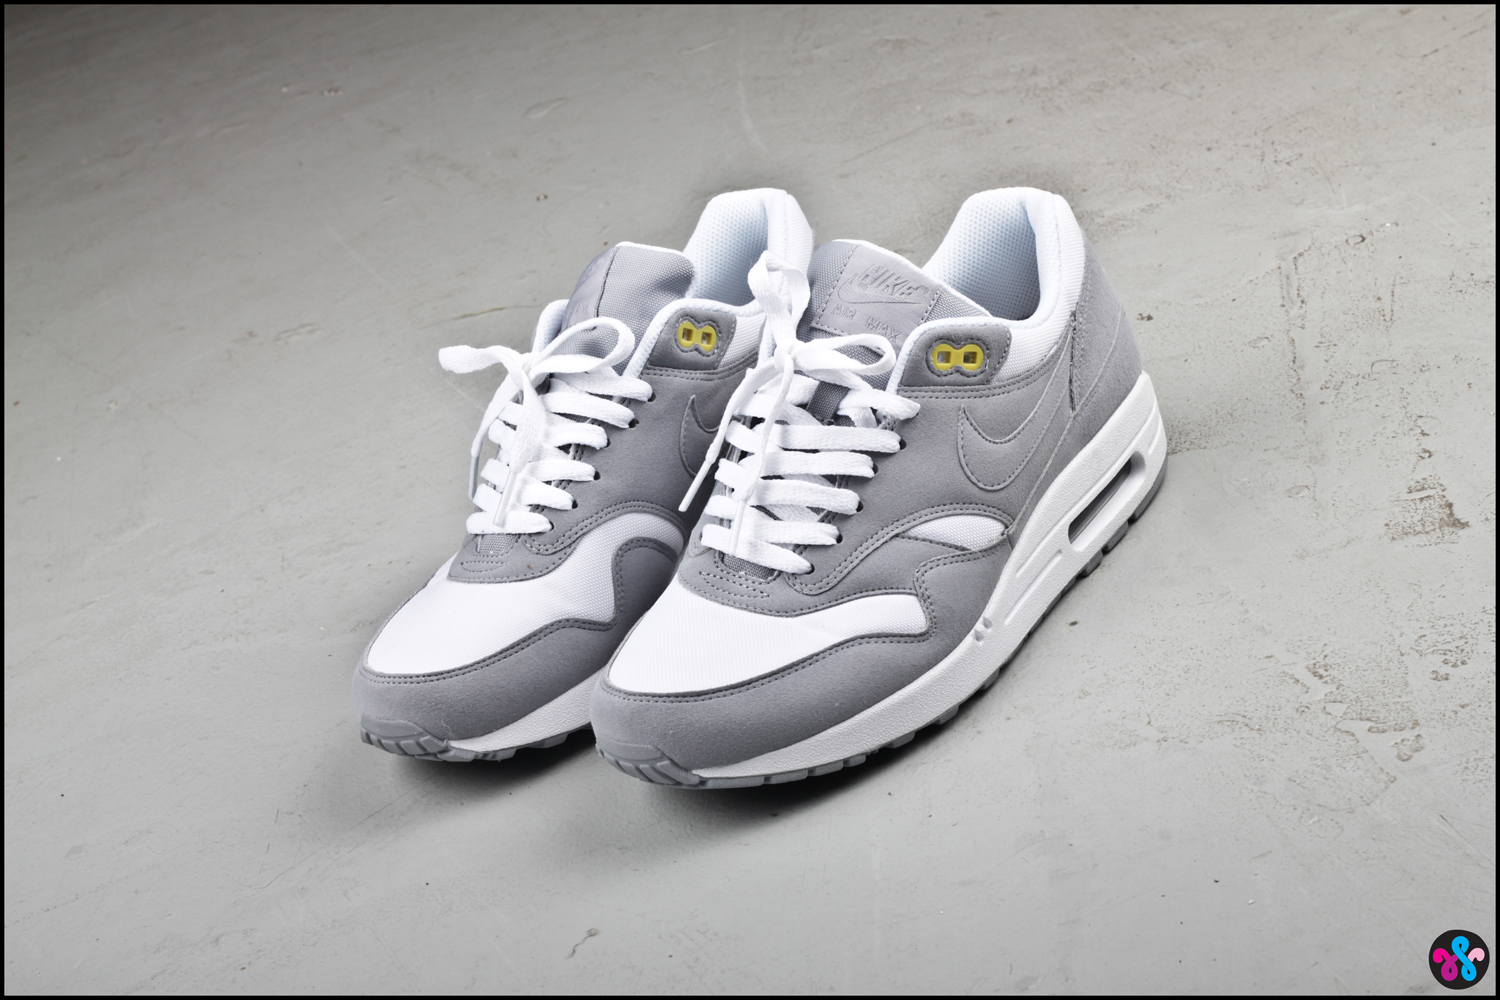 bouw Slijm Roux Nike WMNS Air Max 1 - Two Colorways | Sole Collector